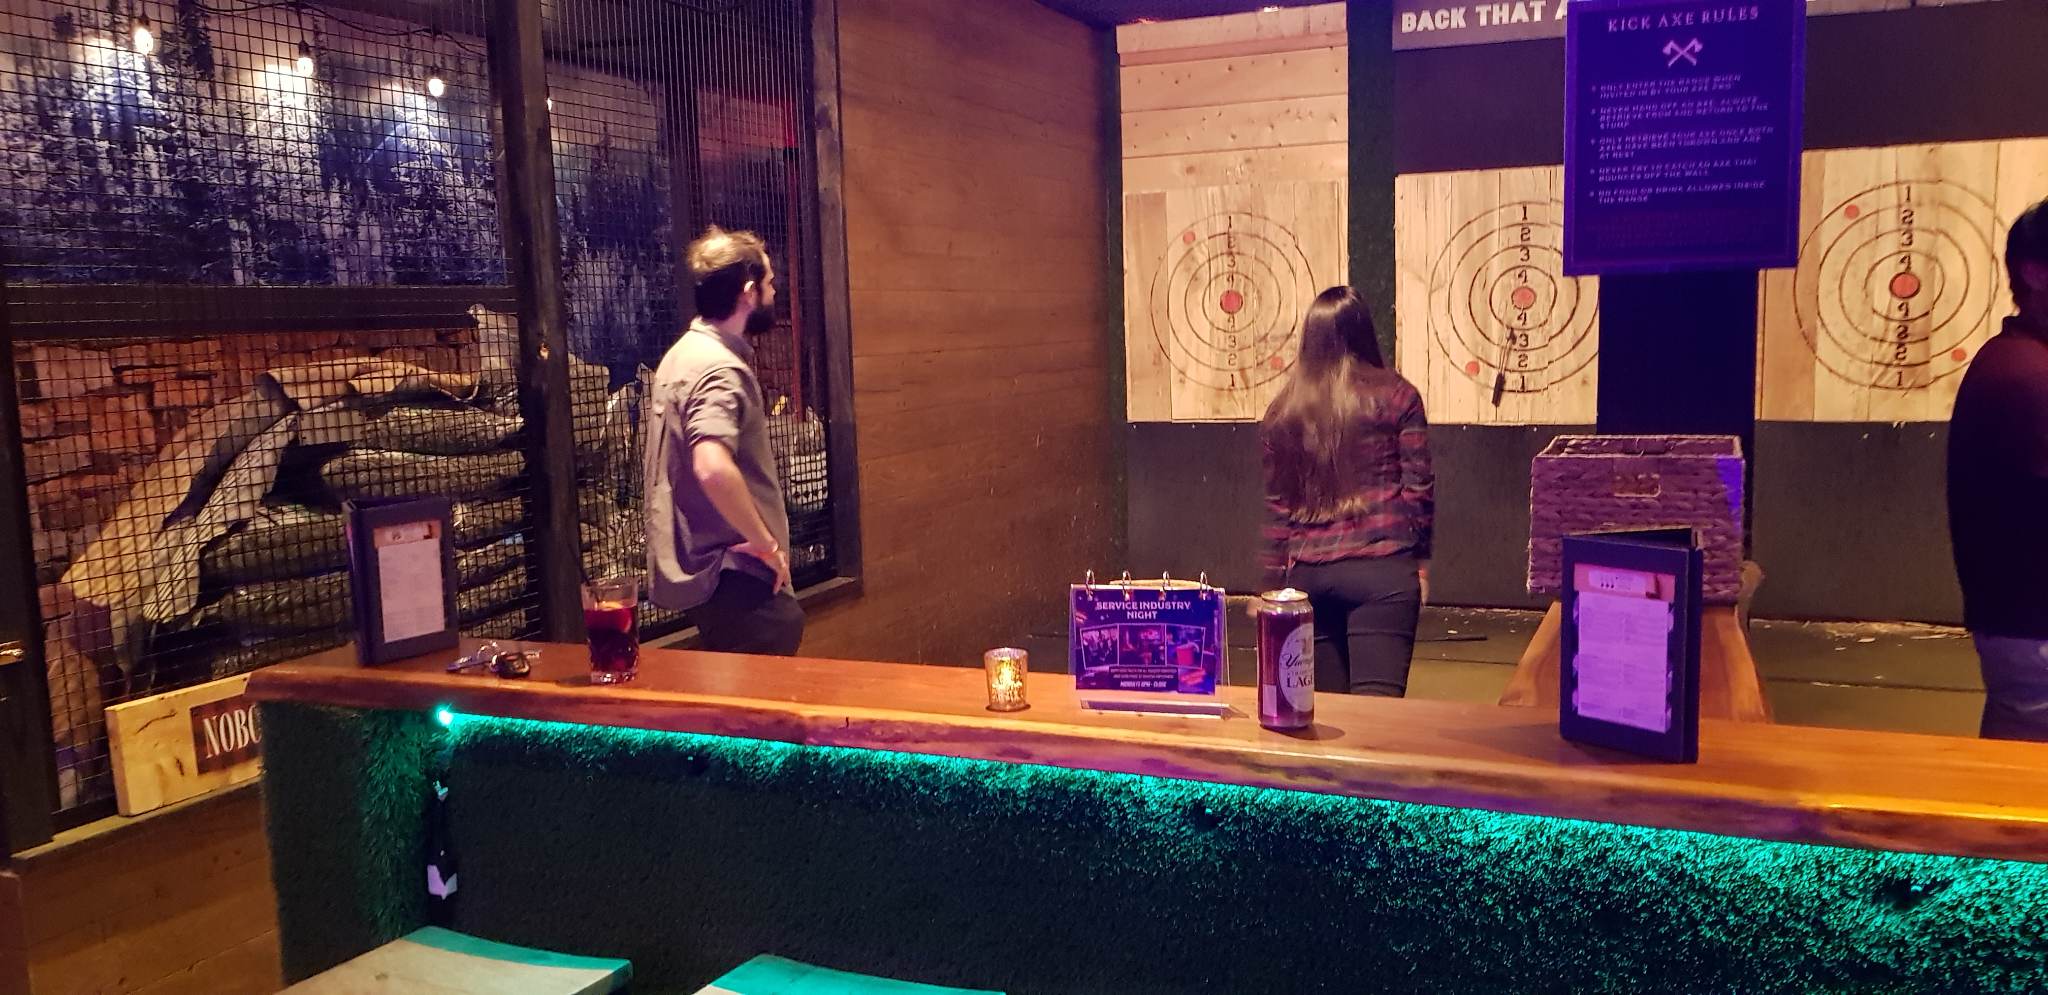 Lab members throw axes at targets